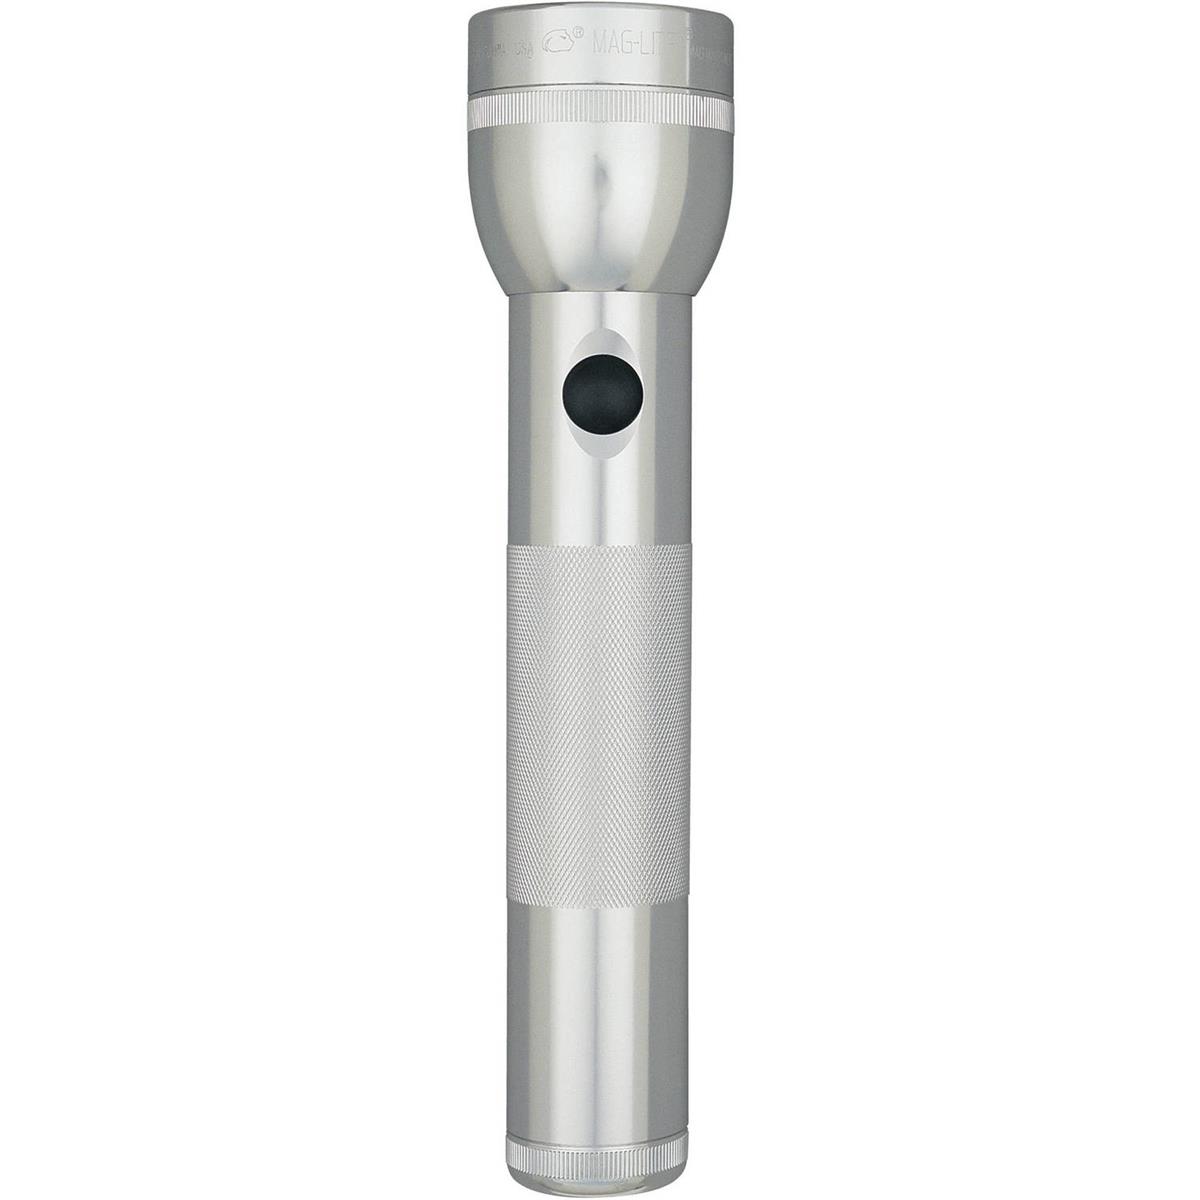 White Star Flashlight with D Batteries, Silver - MagLite S2D106